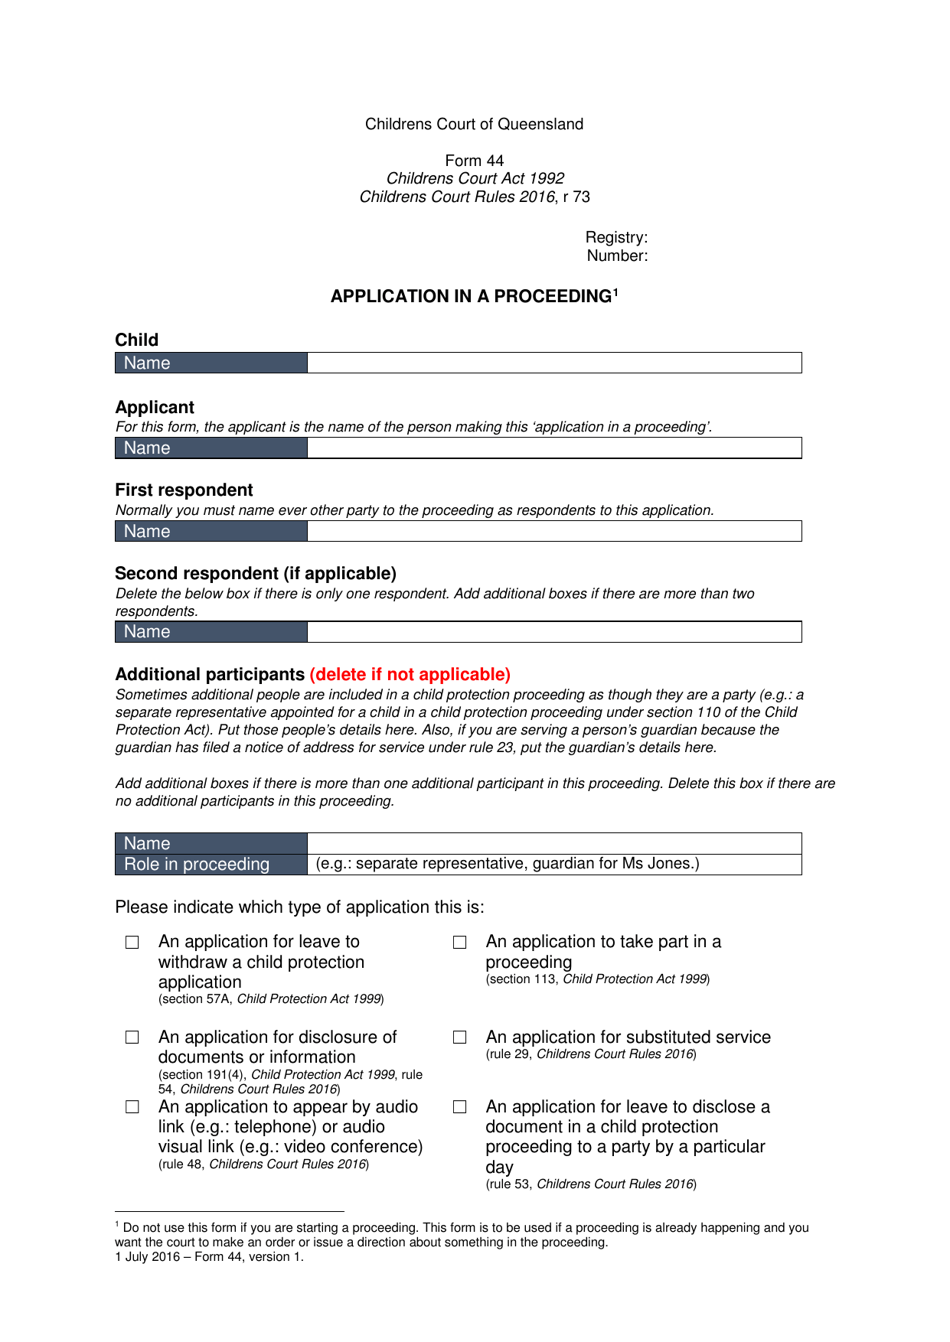 Form 44 Application in a Proceeding - Queensland, Australia, Page 1